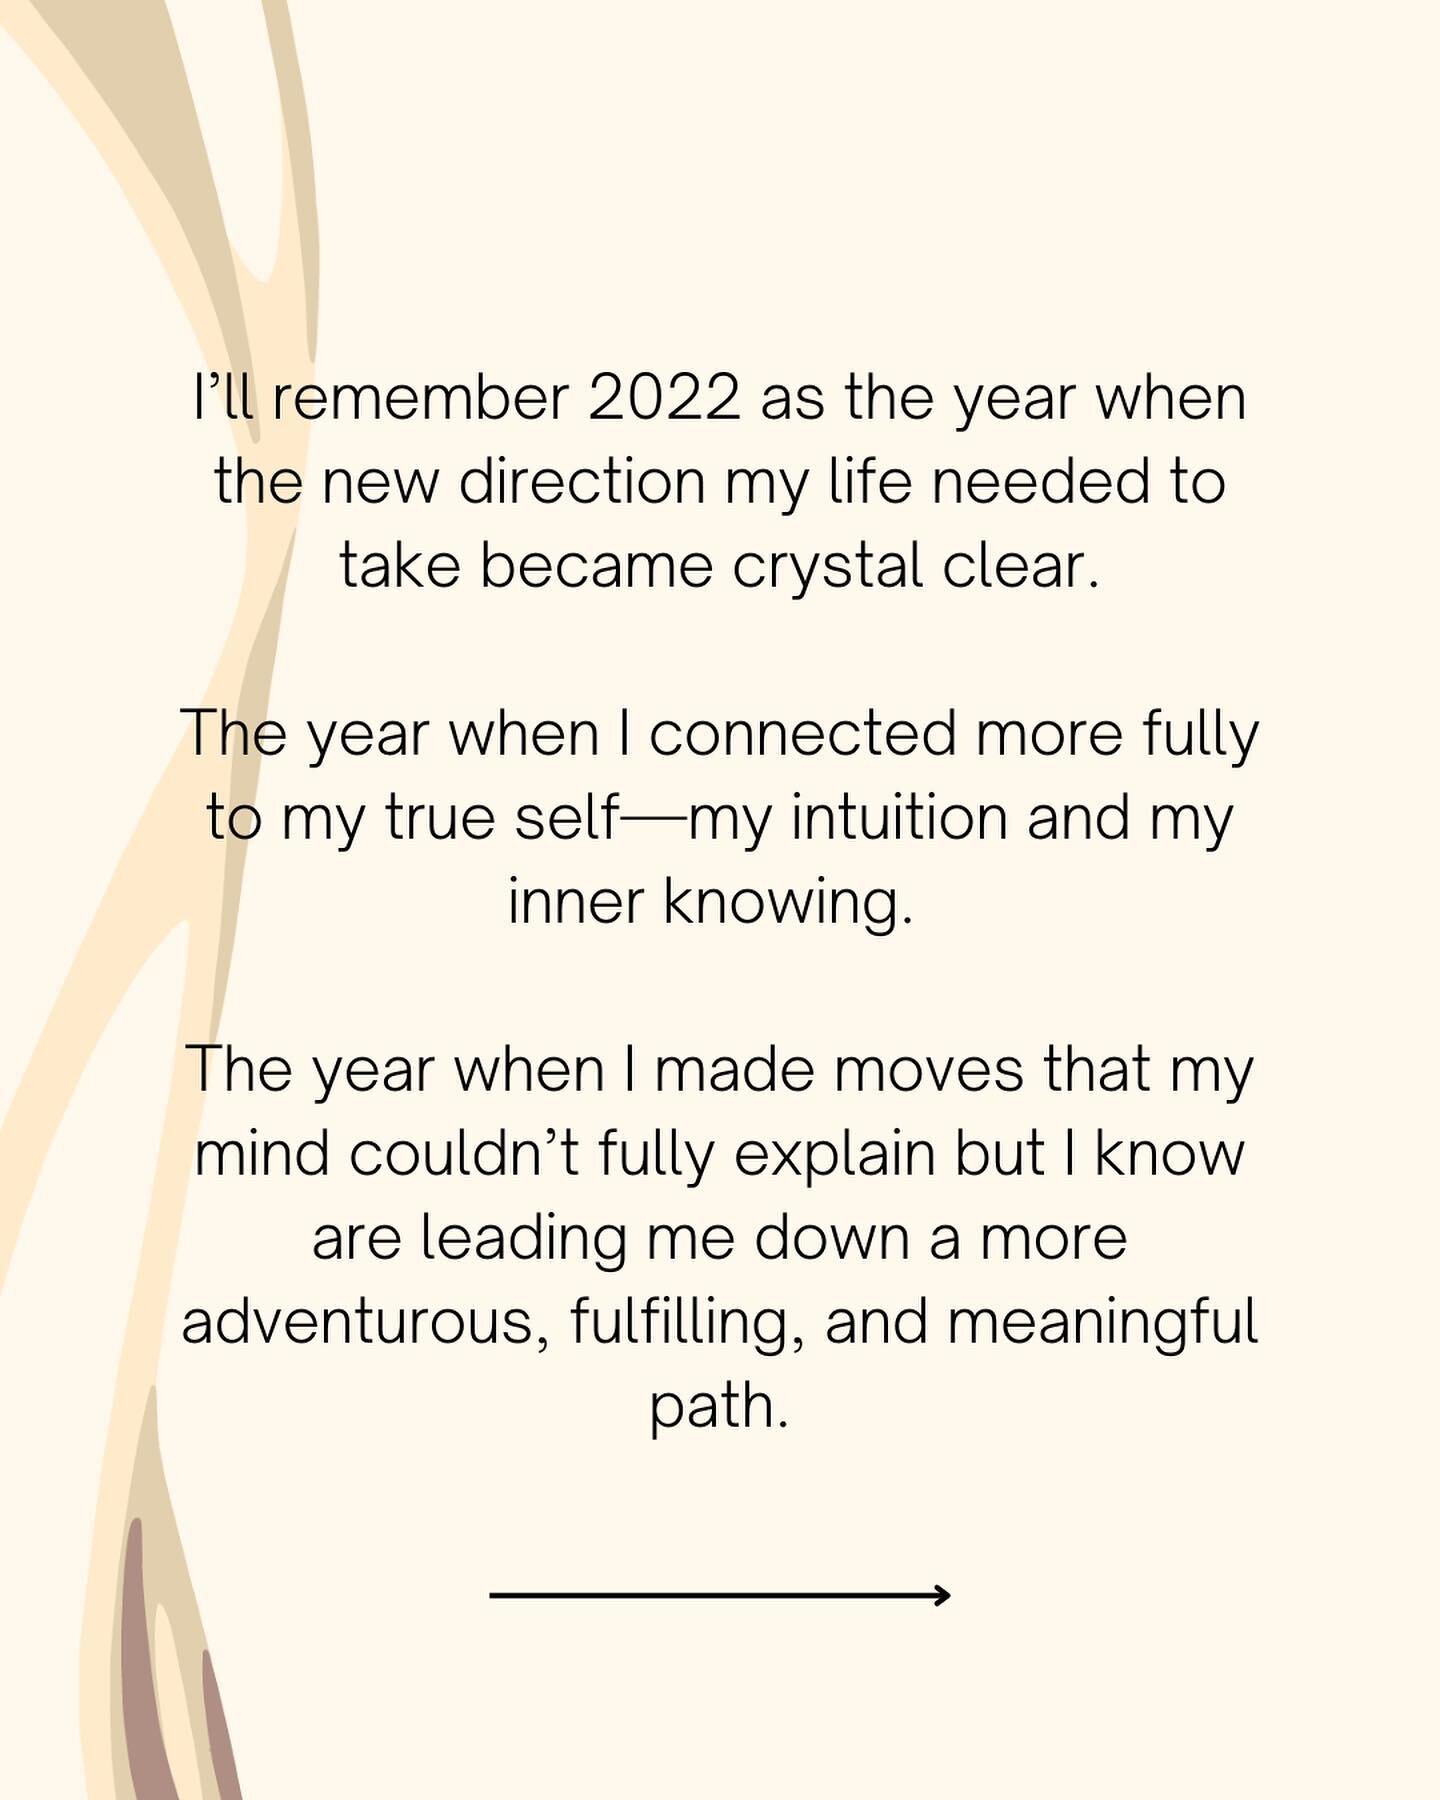 I&rsquo;ll remember 2022 as the year when the new direction my life needed to take became crystal clear.

The year when I connected more fully to my true self&mdash;my intuition and my inner knowing.

The year when I made moves that my mind couldn&rs